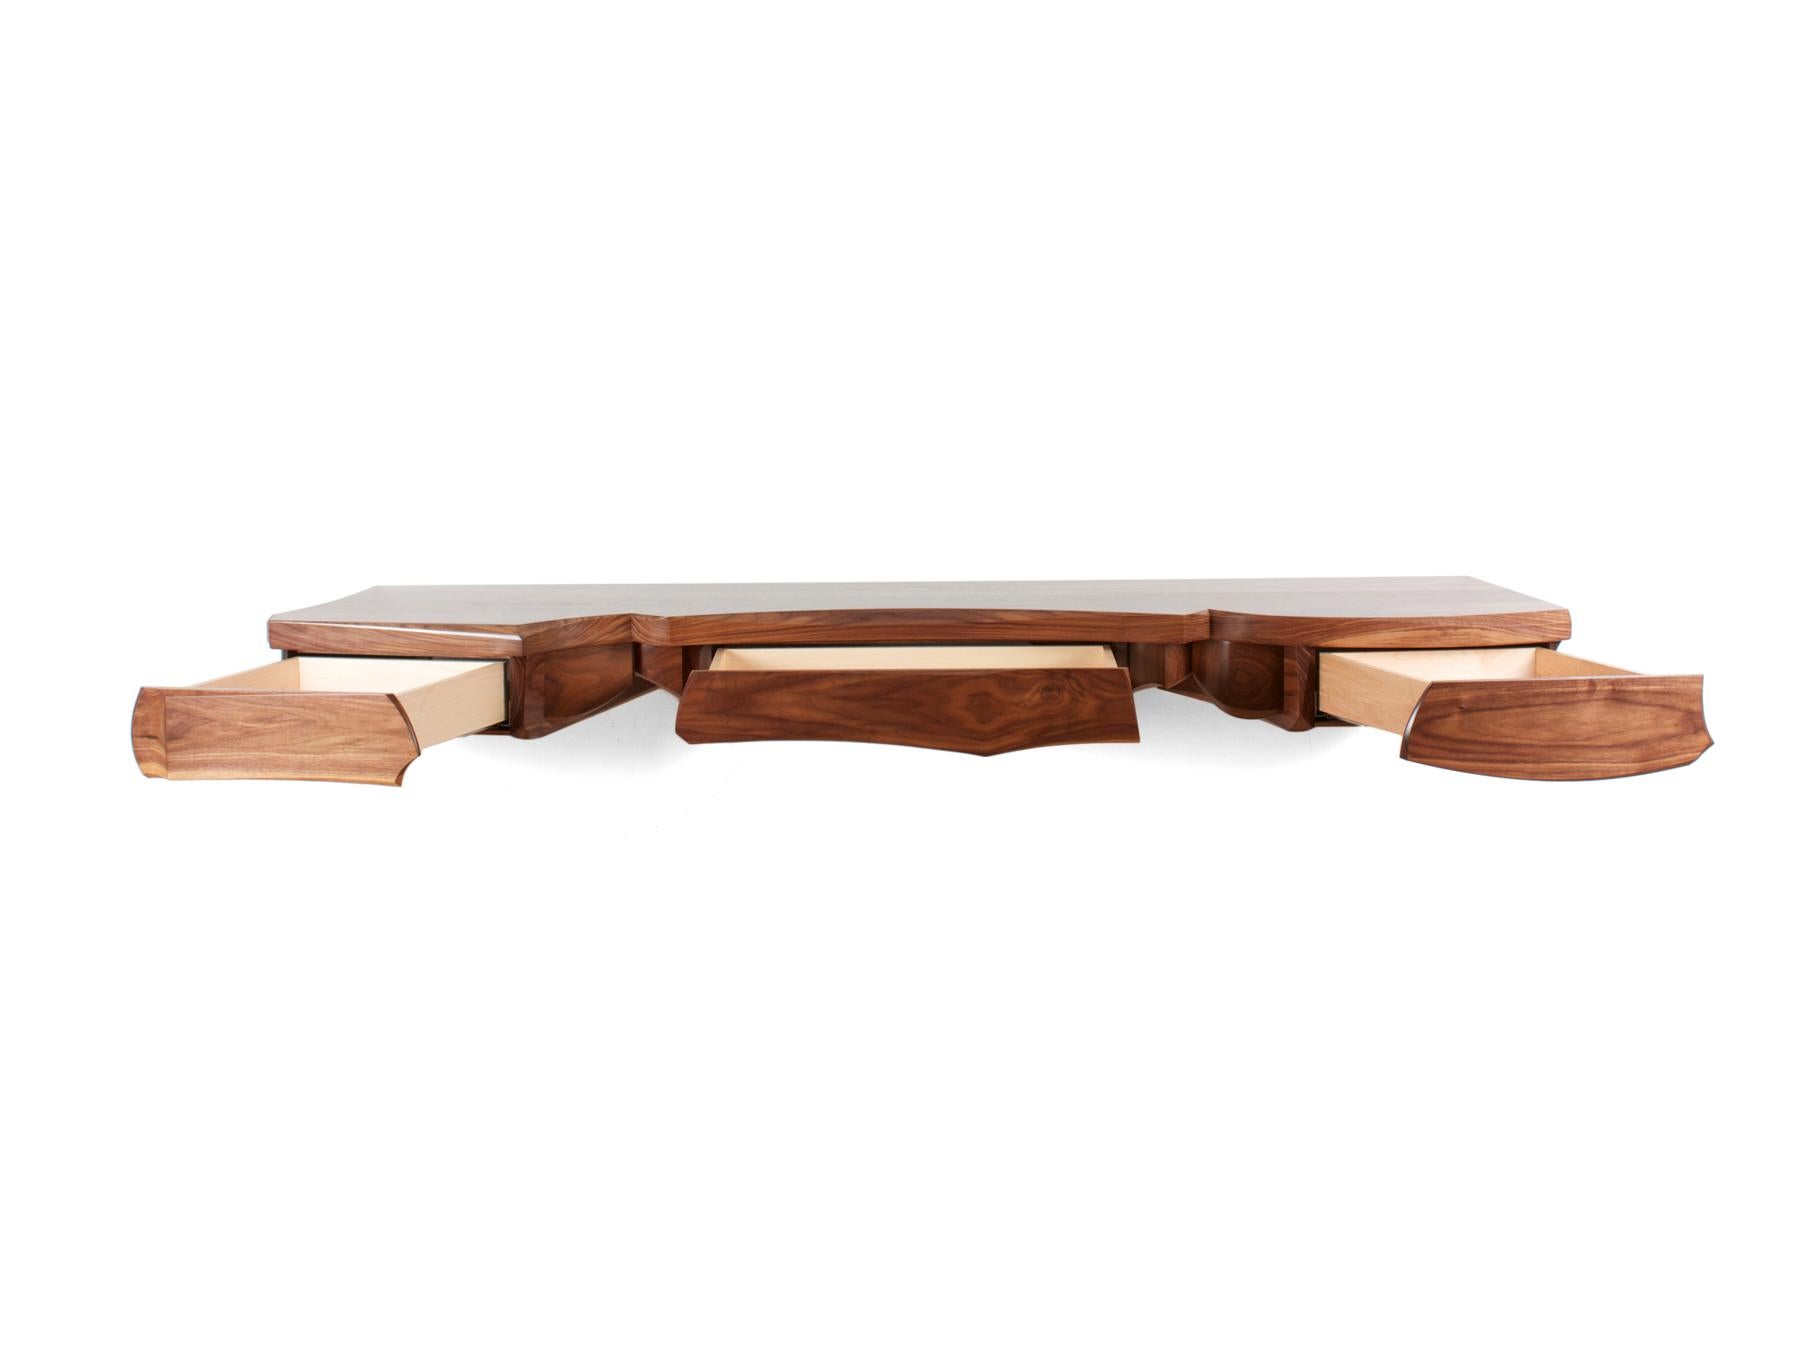 This version of the floating console explored a slightly more symmetrical shape than some of the other iterations of this piece. The focus was on the three drawers that are incorporated within the sculptural under structure of the piece. The narrow